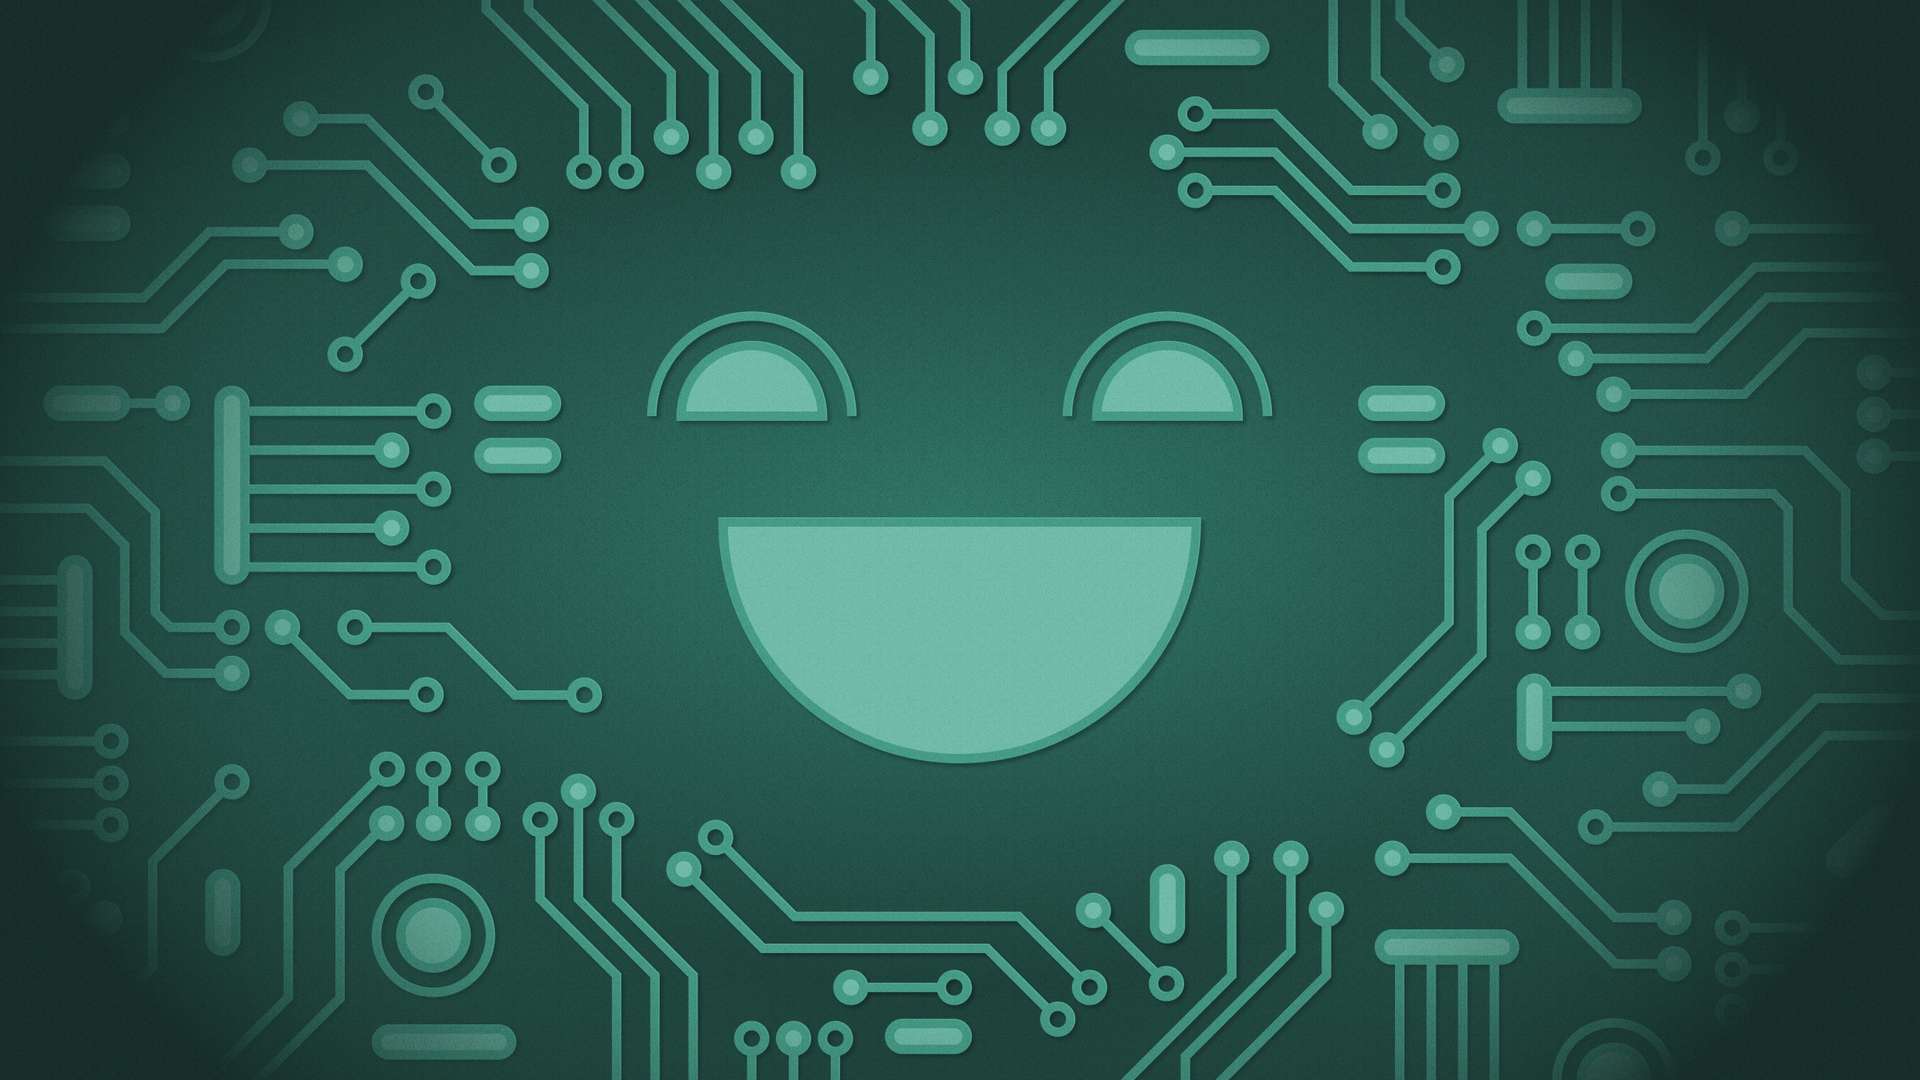 The traces and pads of a computer chip connect around an illuminated smiley face at the center.